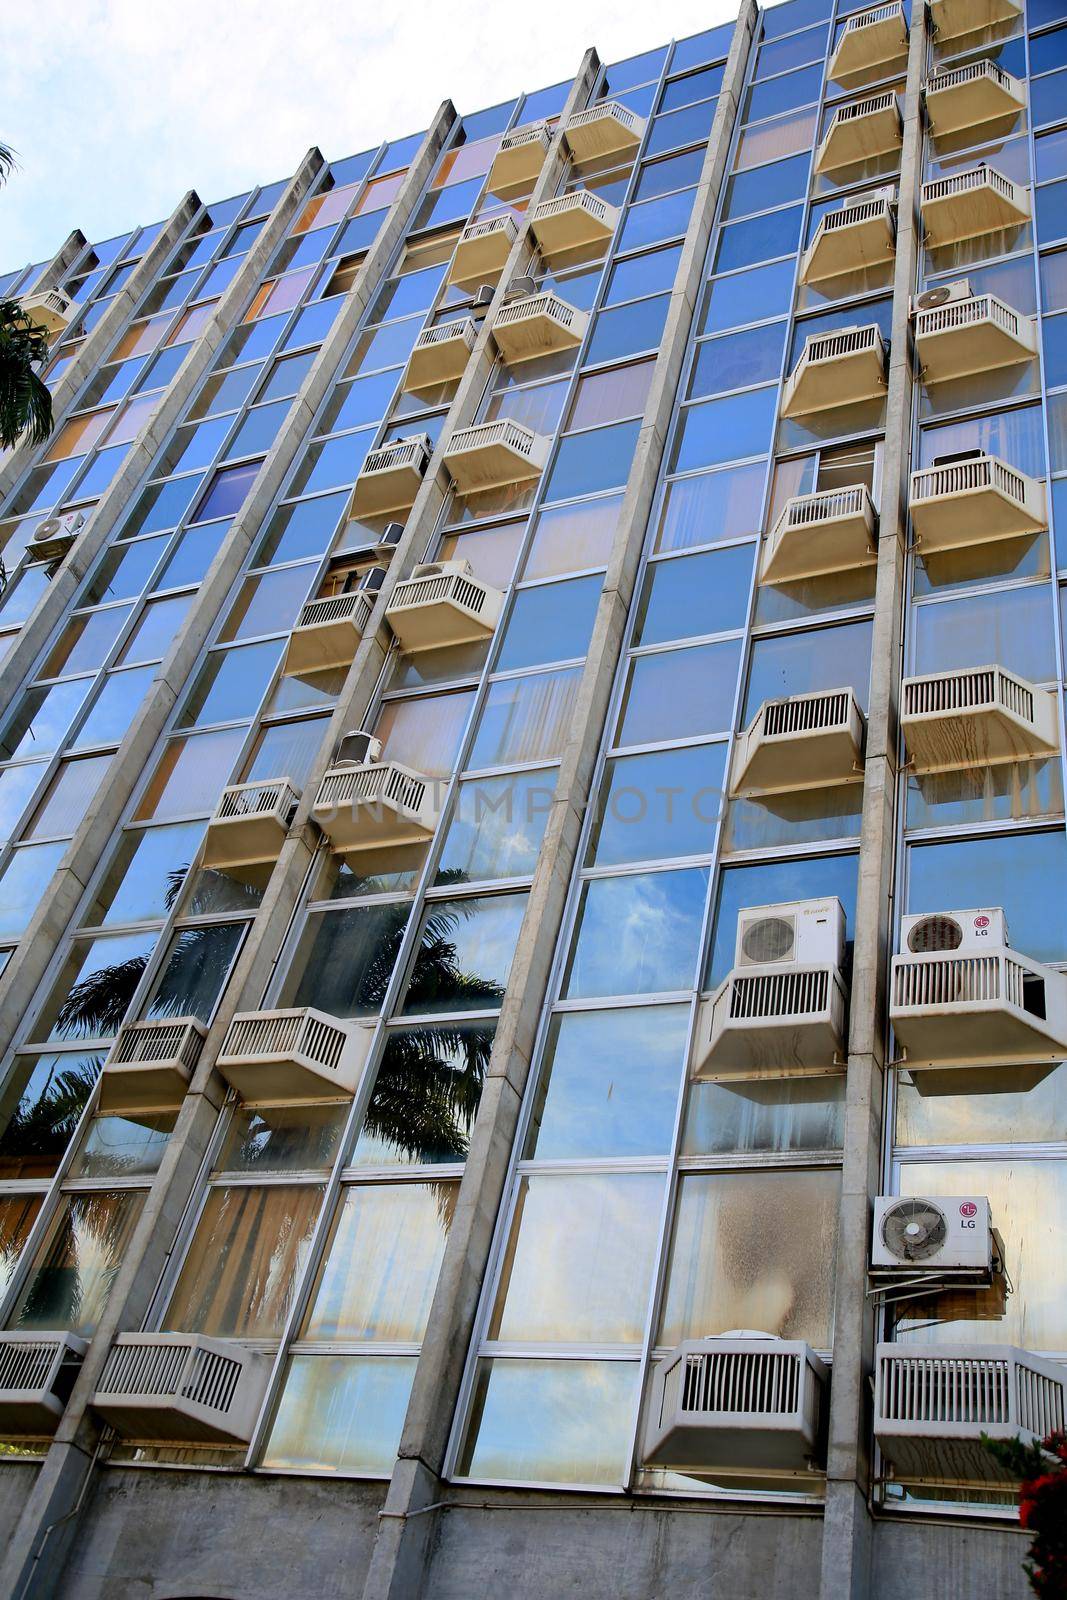 air conditioners on commercial building facade by joasouza